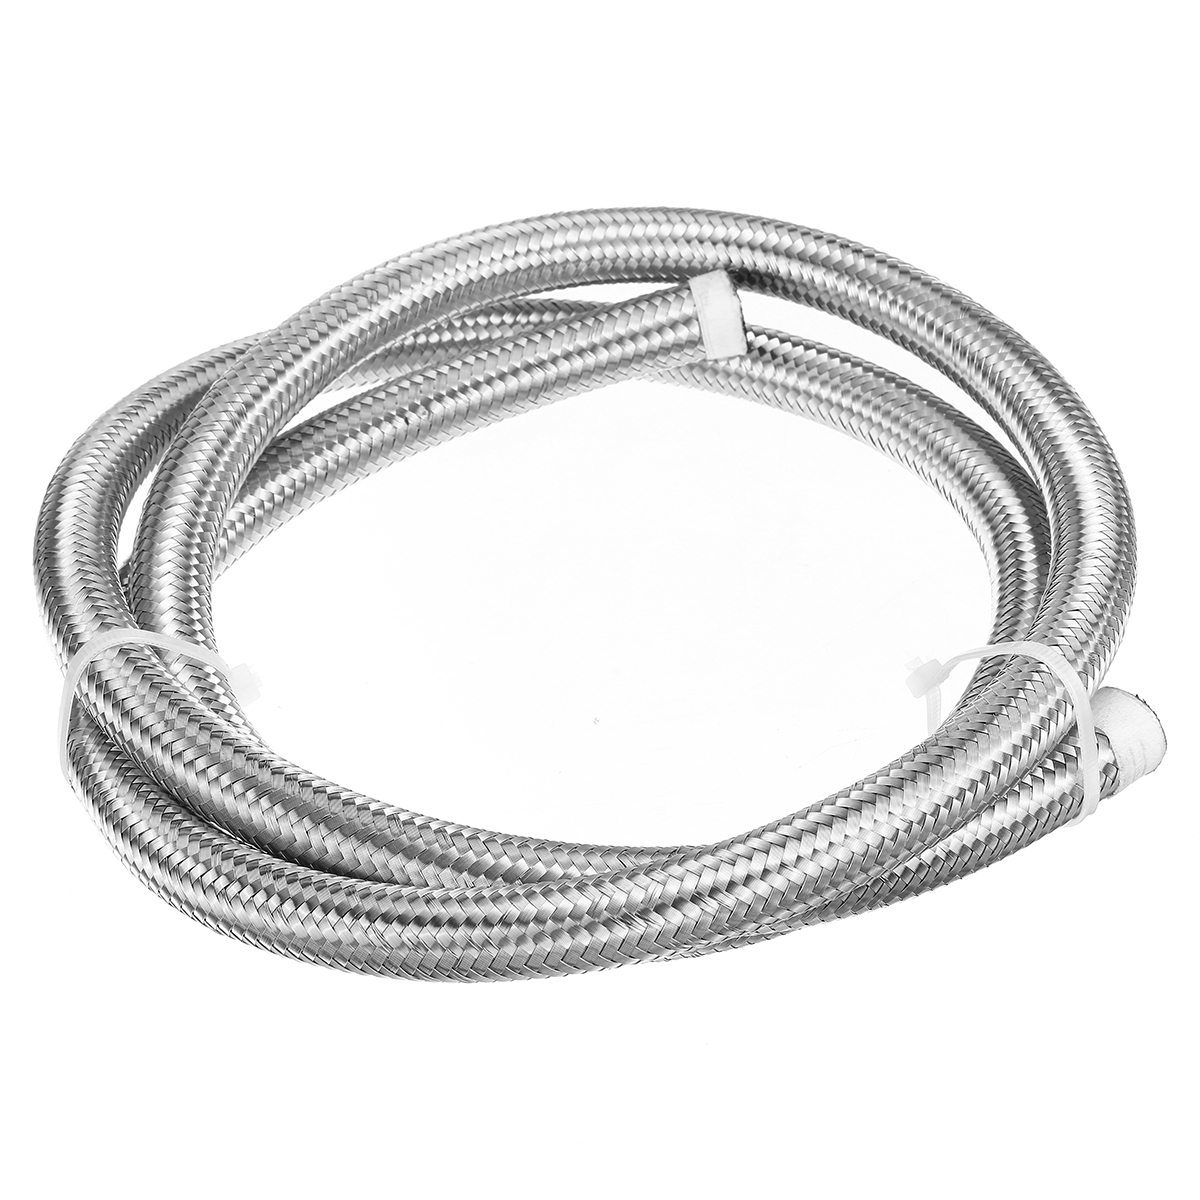 5FT-AN4-AN6-AN8-AN10-Fuel-Hose-Oil-Gas-Line-Pipe-Stainless-Steel-Braided-Silver-1685006-5